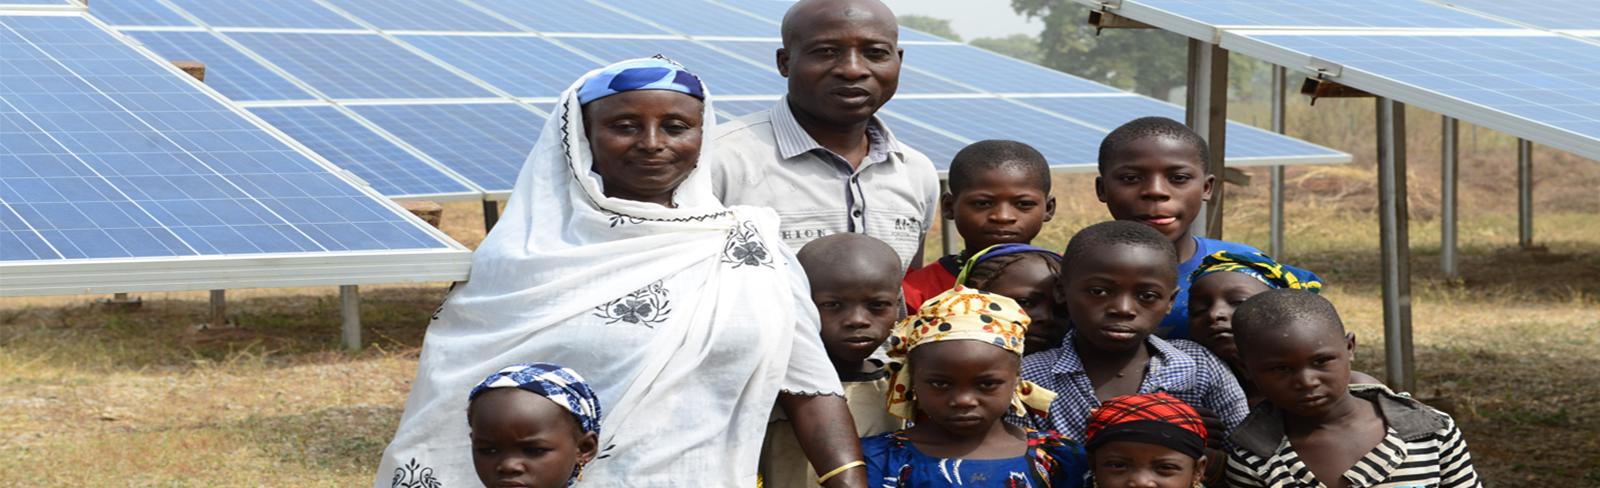 Funding the Sun: New Paradigms for Financing Off-Grid Solar Companies